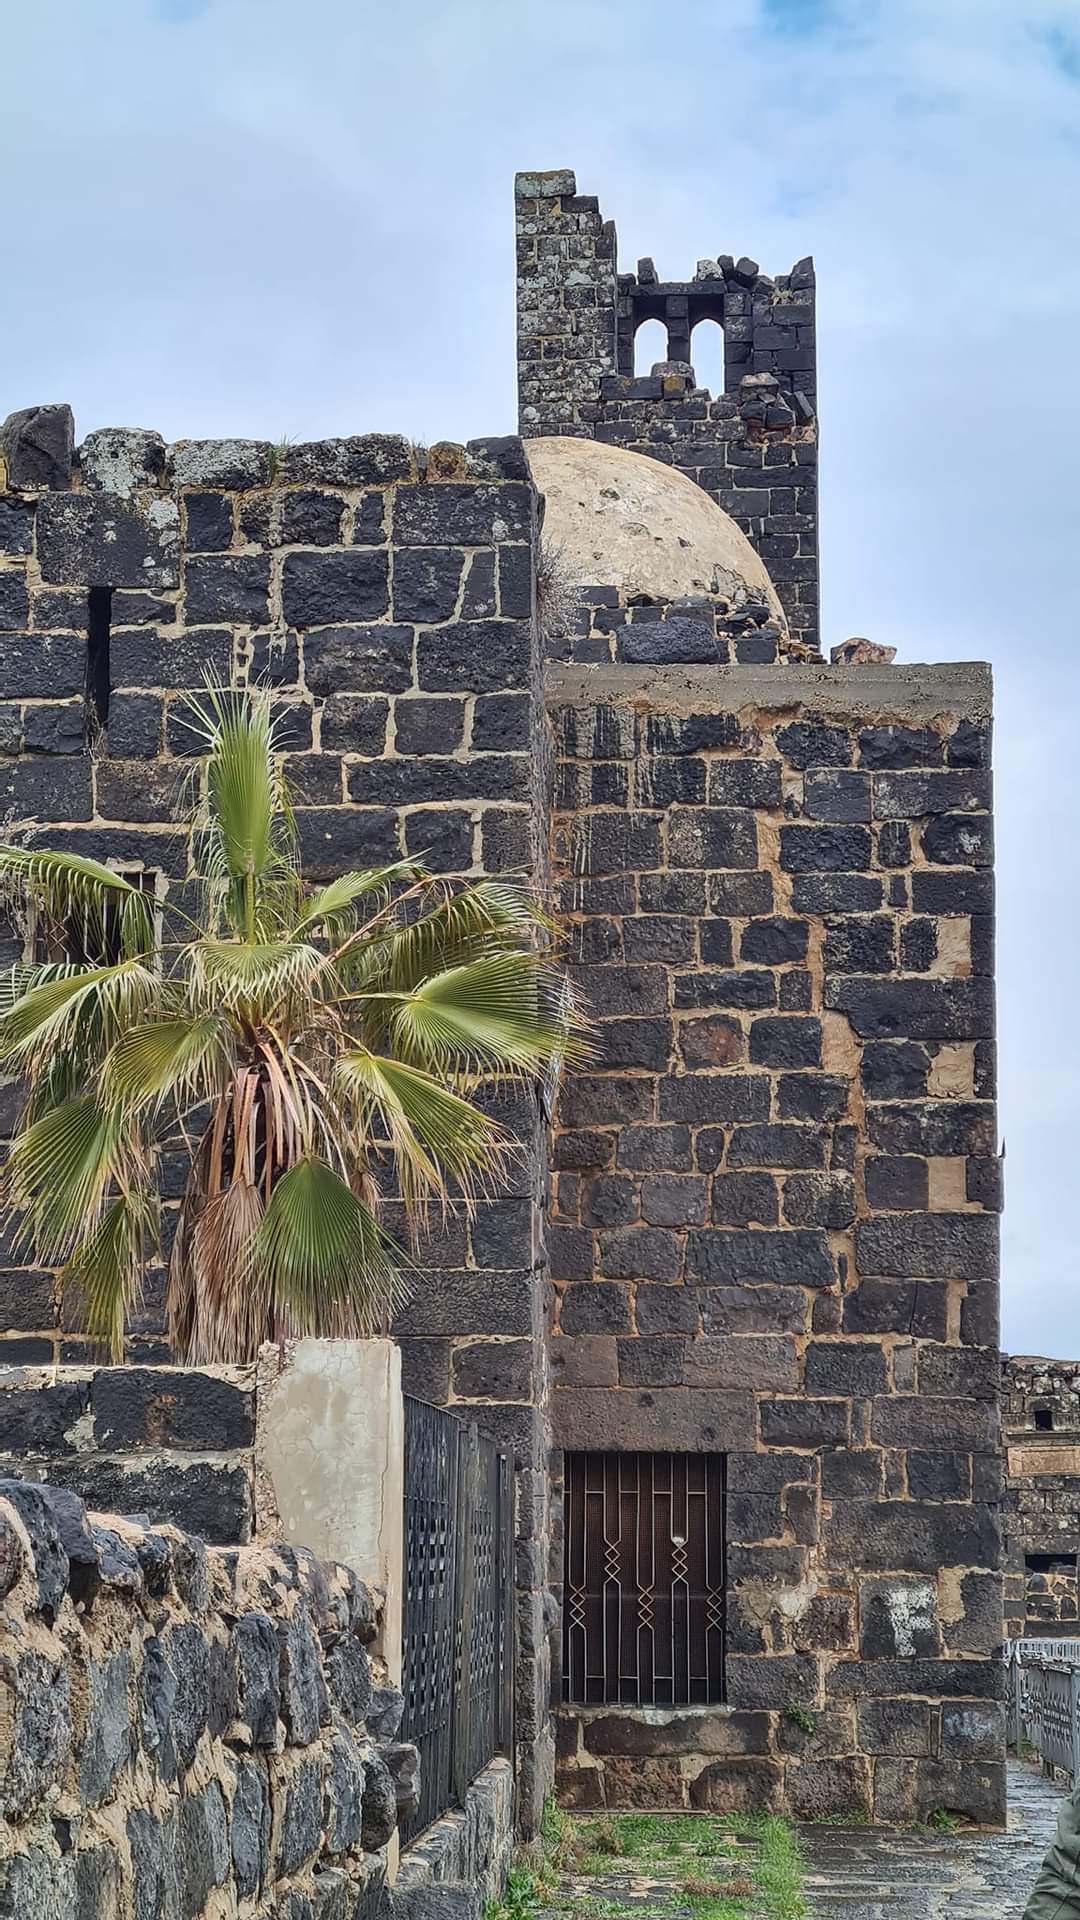 War damage to the tower in Bosra, Syria